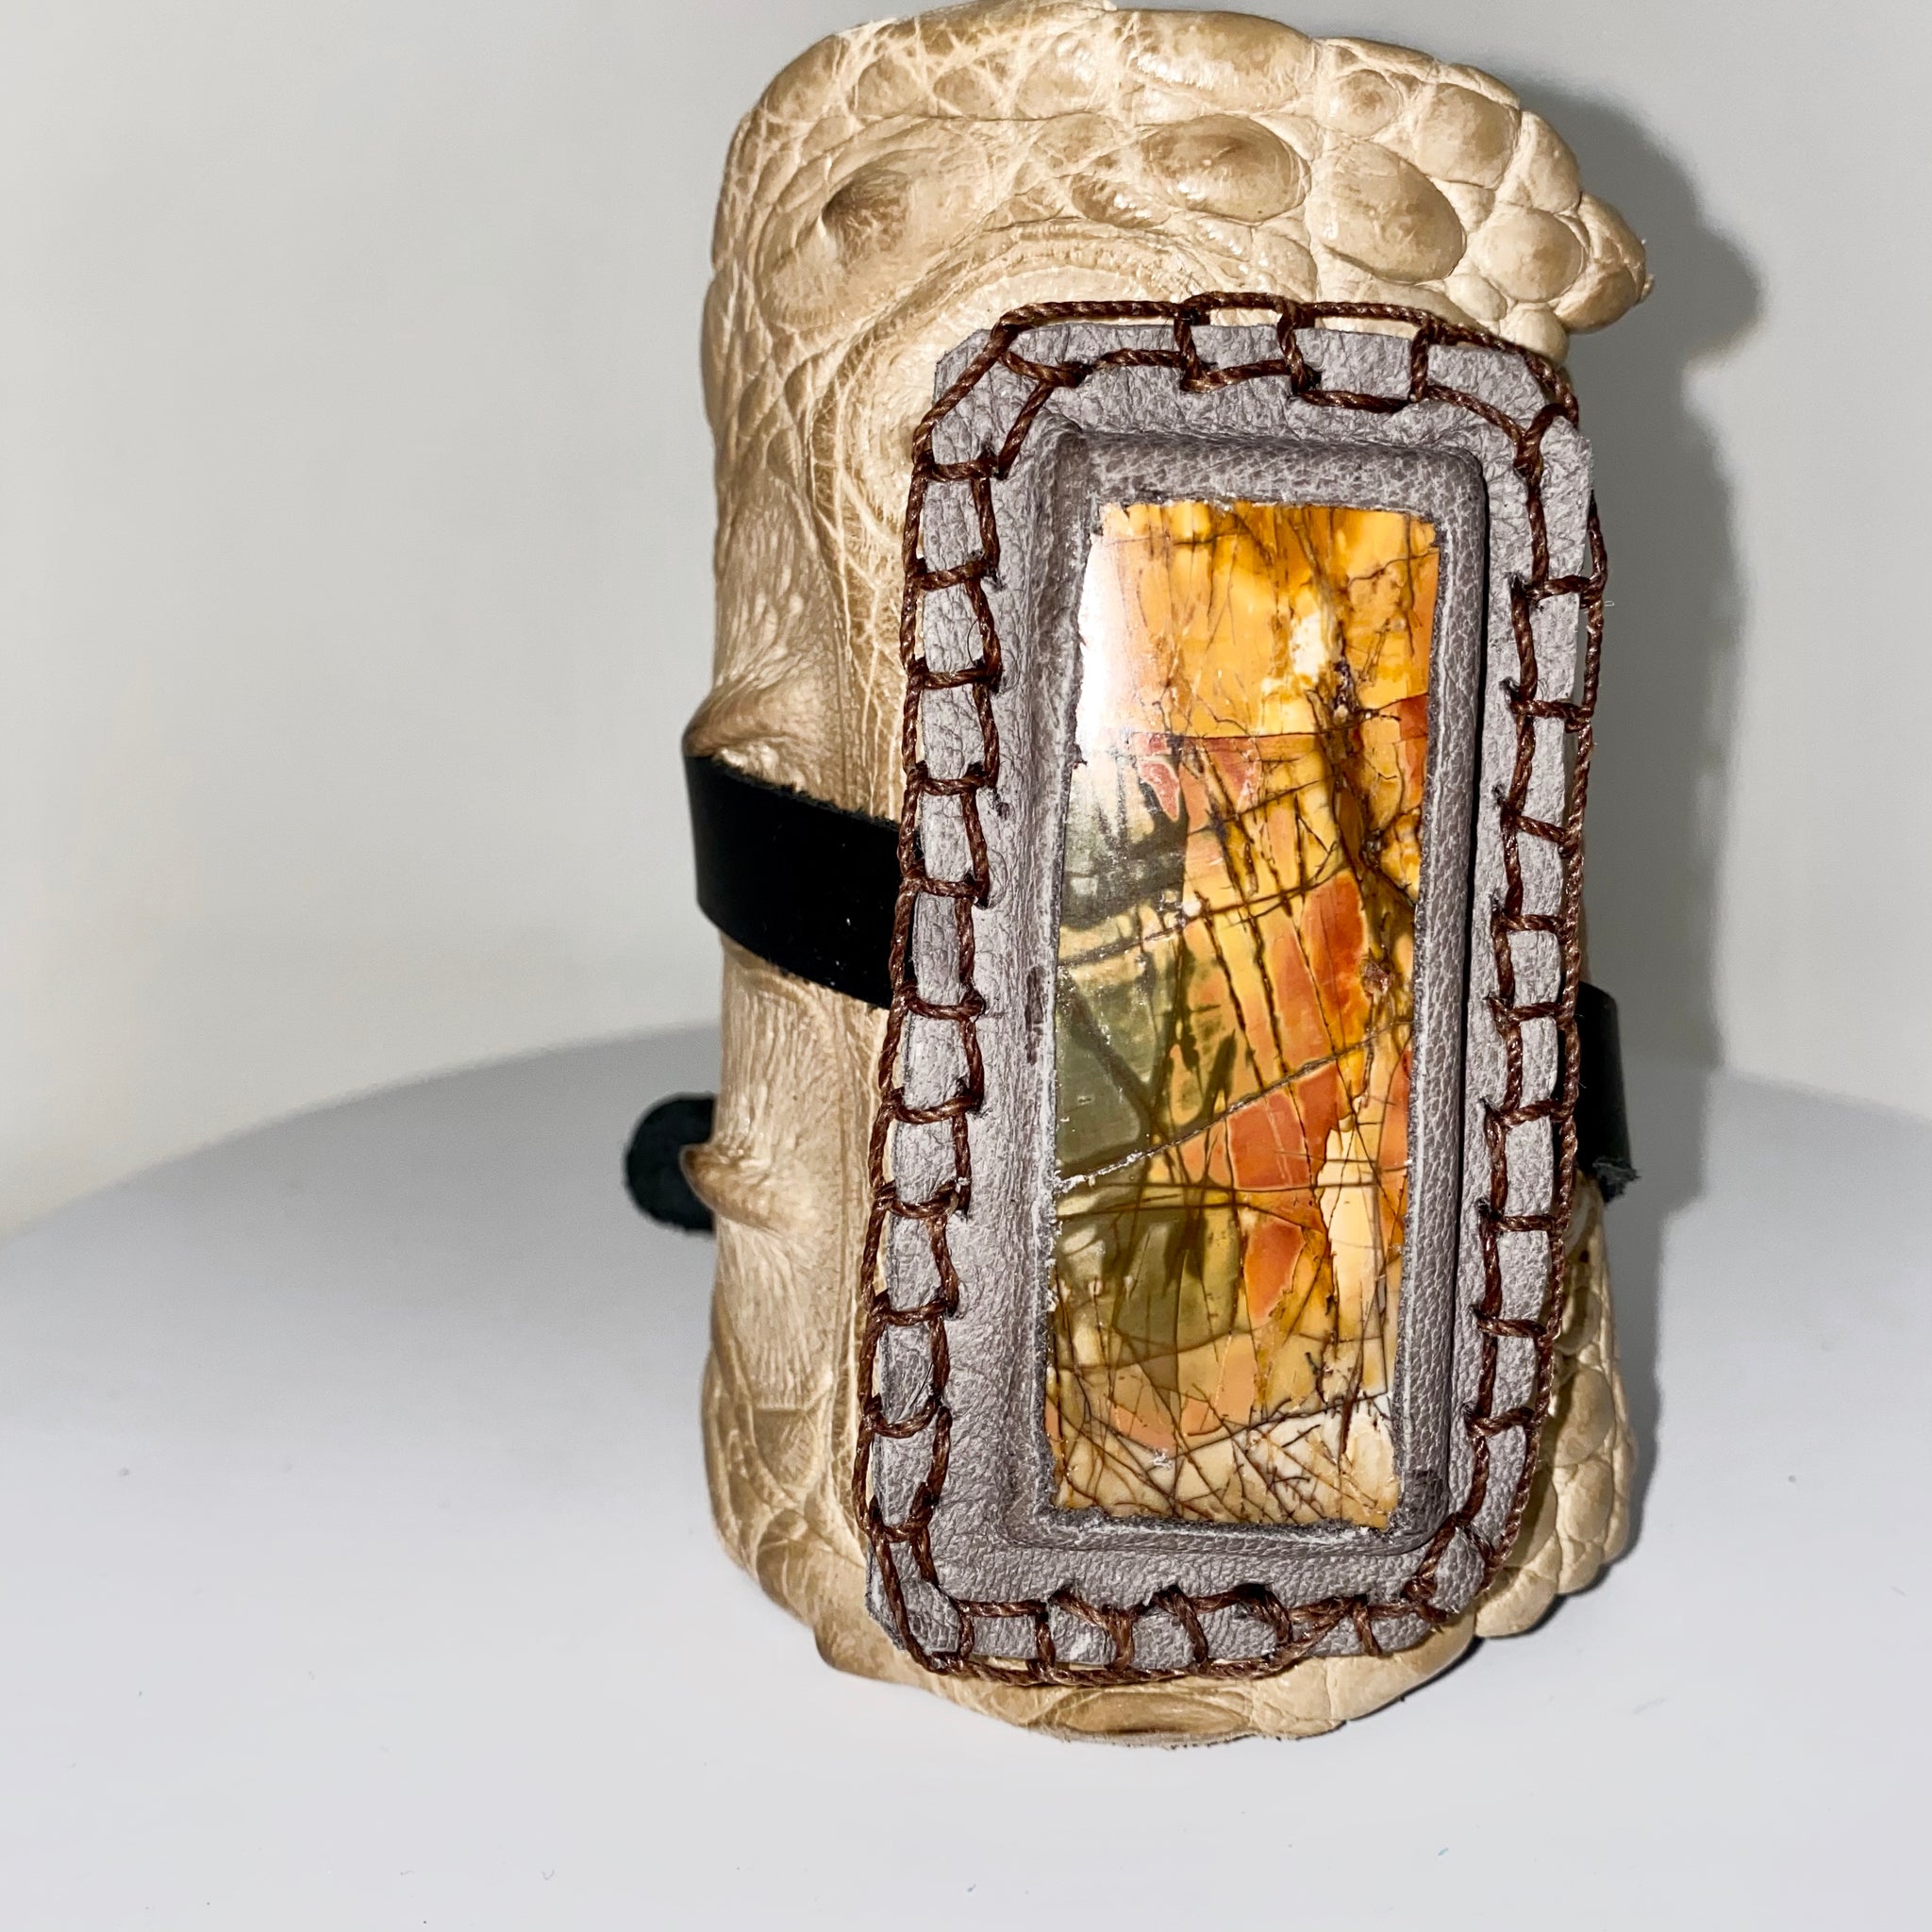 crocodile cuff with large stone set in leather by NYET Jewelry.